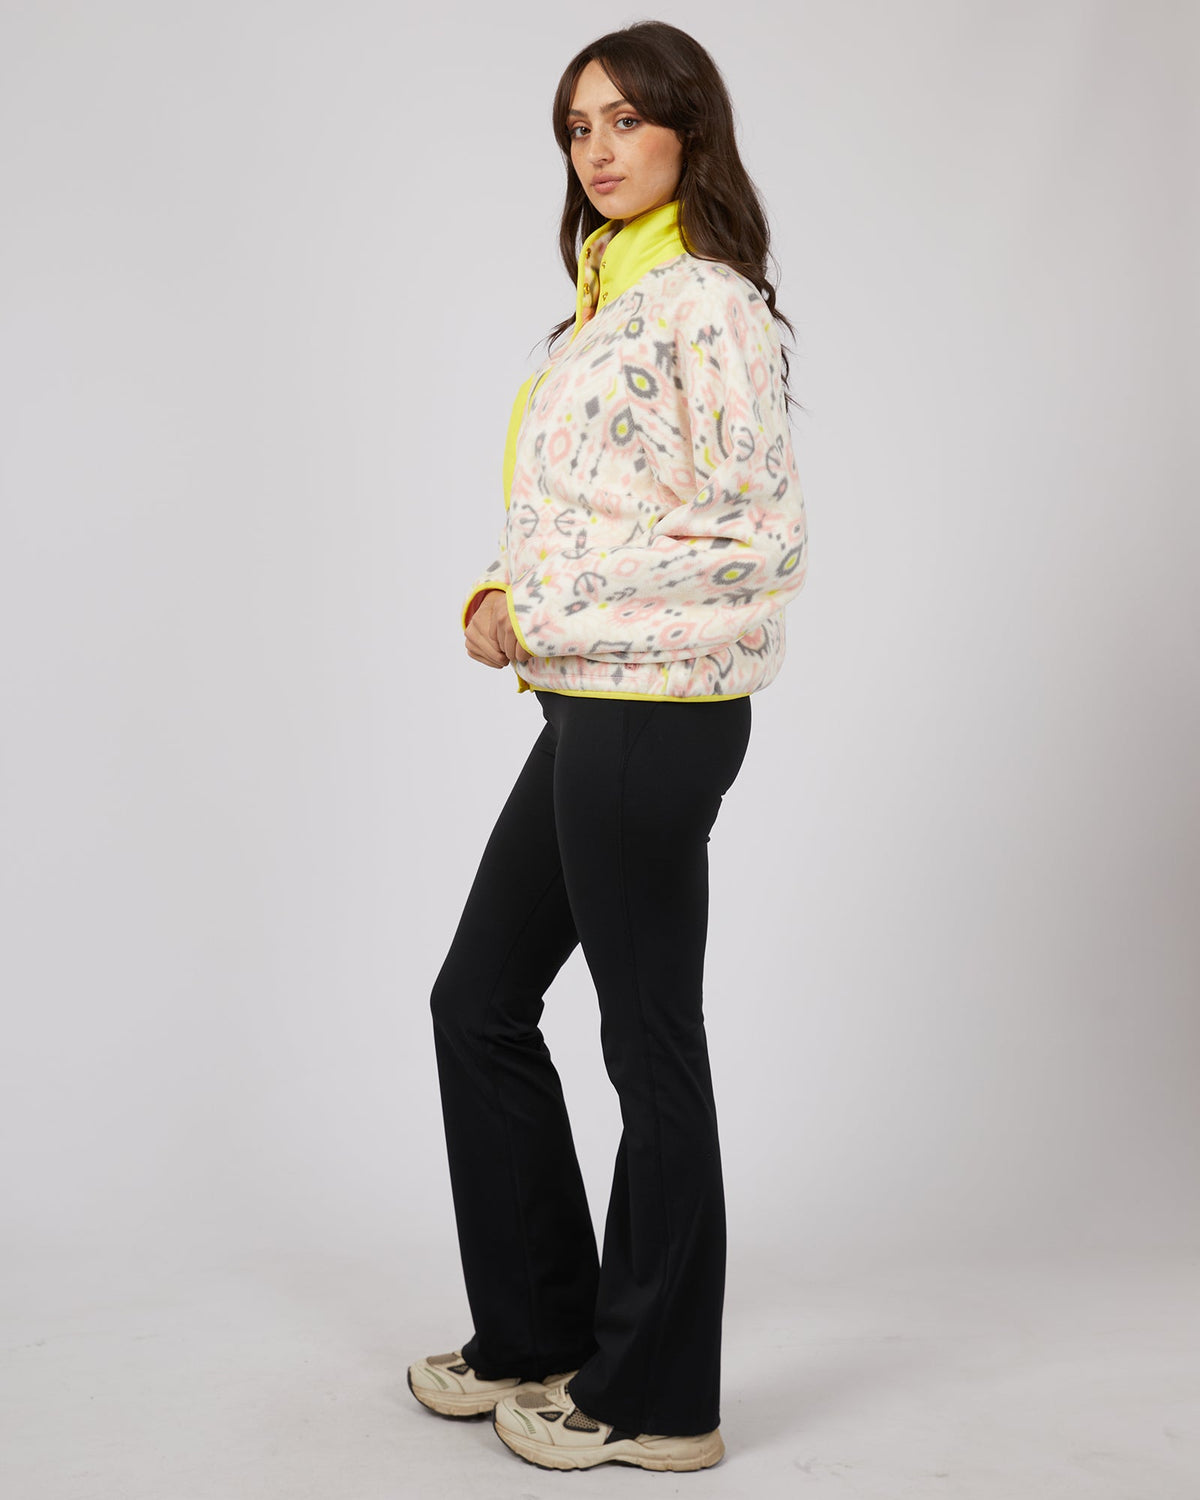 All About Eve-Explore Teddy Jacket Print-Edge Clothing